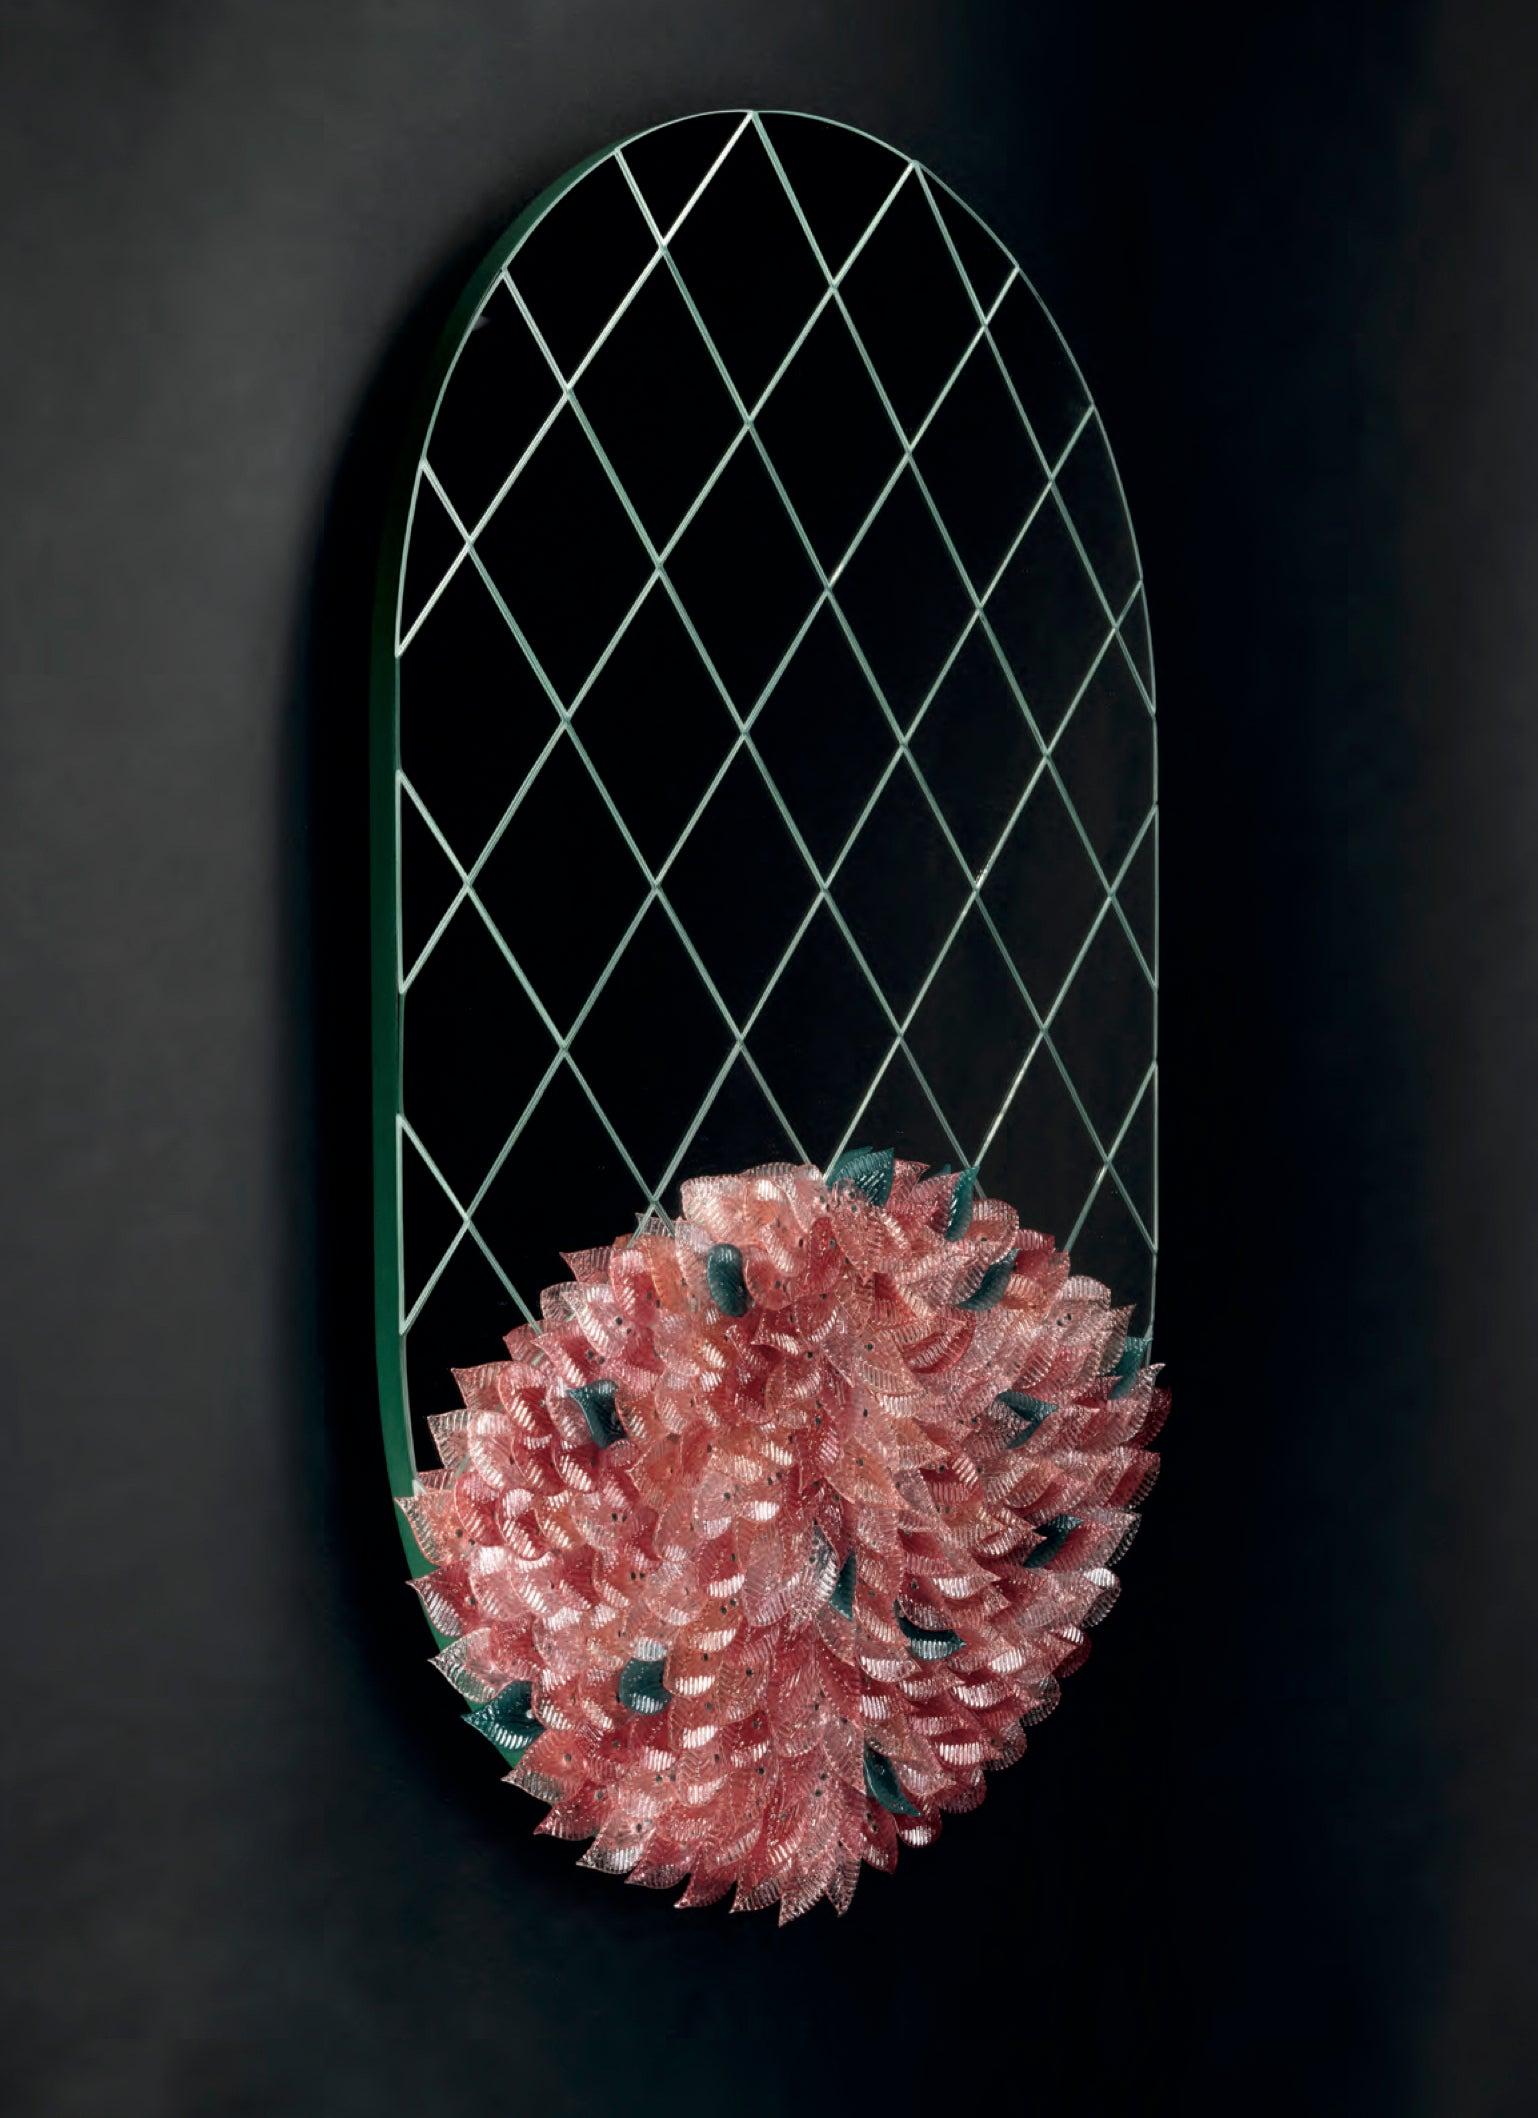 Mirror made with traditional methods of Murano, with application of handcrafted cut and ground silver mirrors and glass leaves applied by hand.